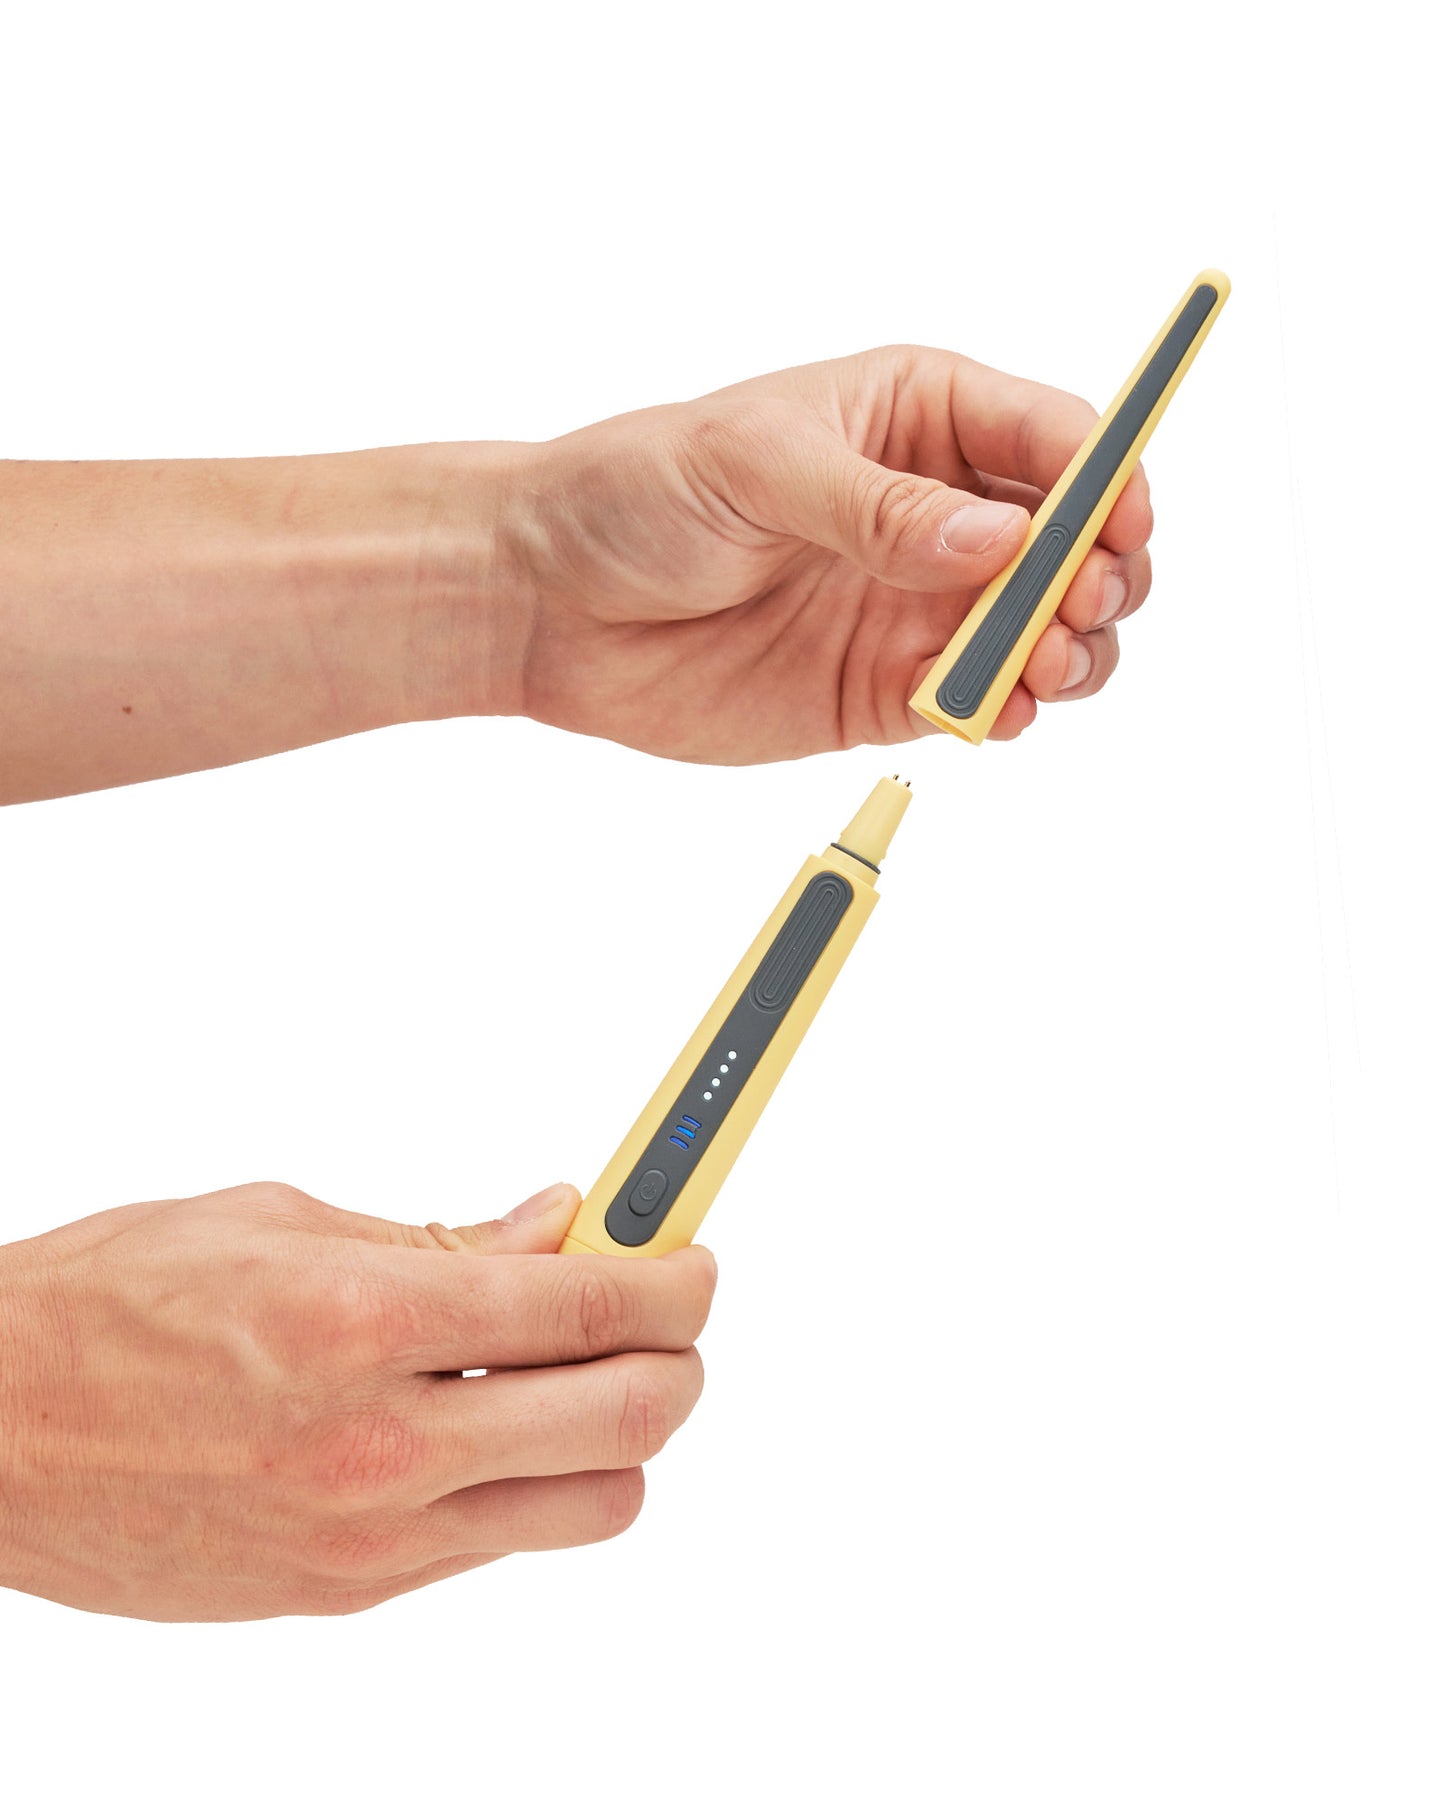 A replacement brush head for the Oreze toothbrush in canary yellow, demonstrated by a model's hands